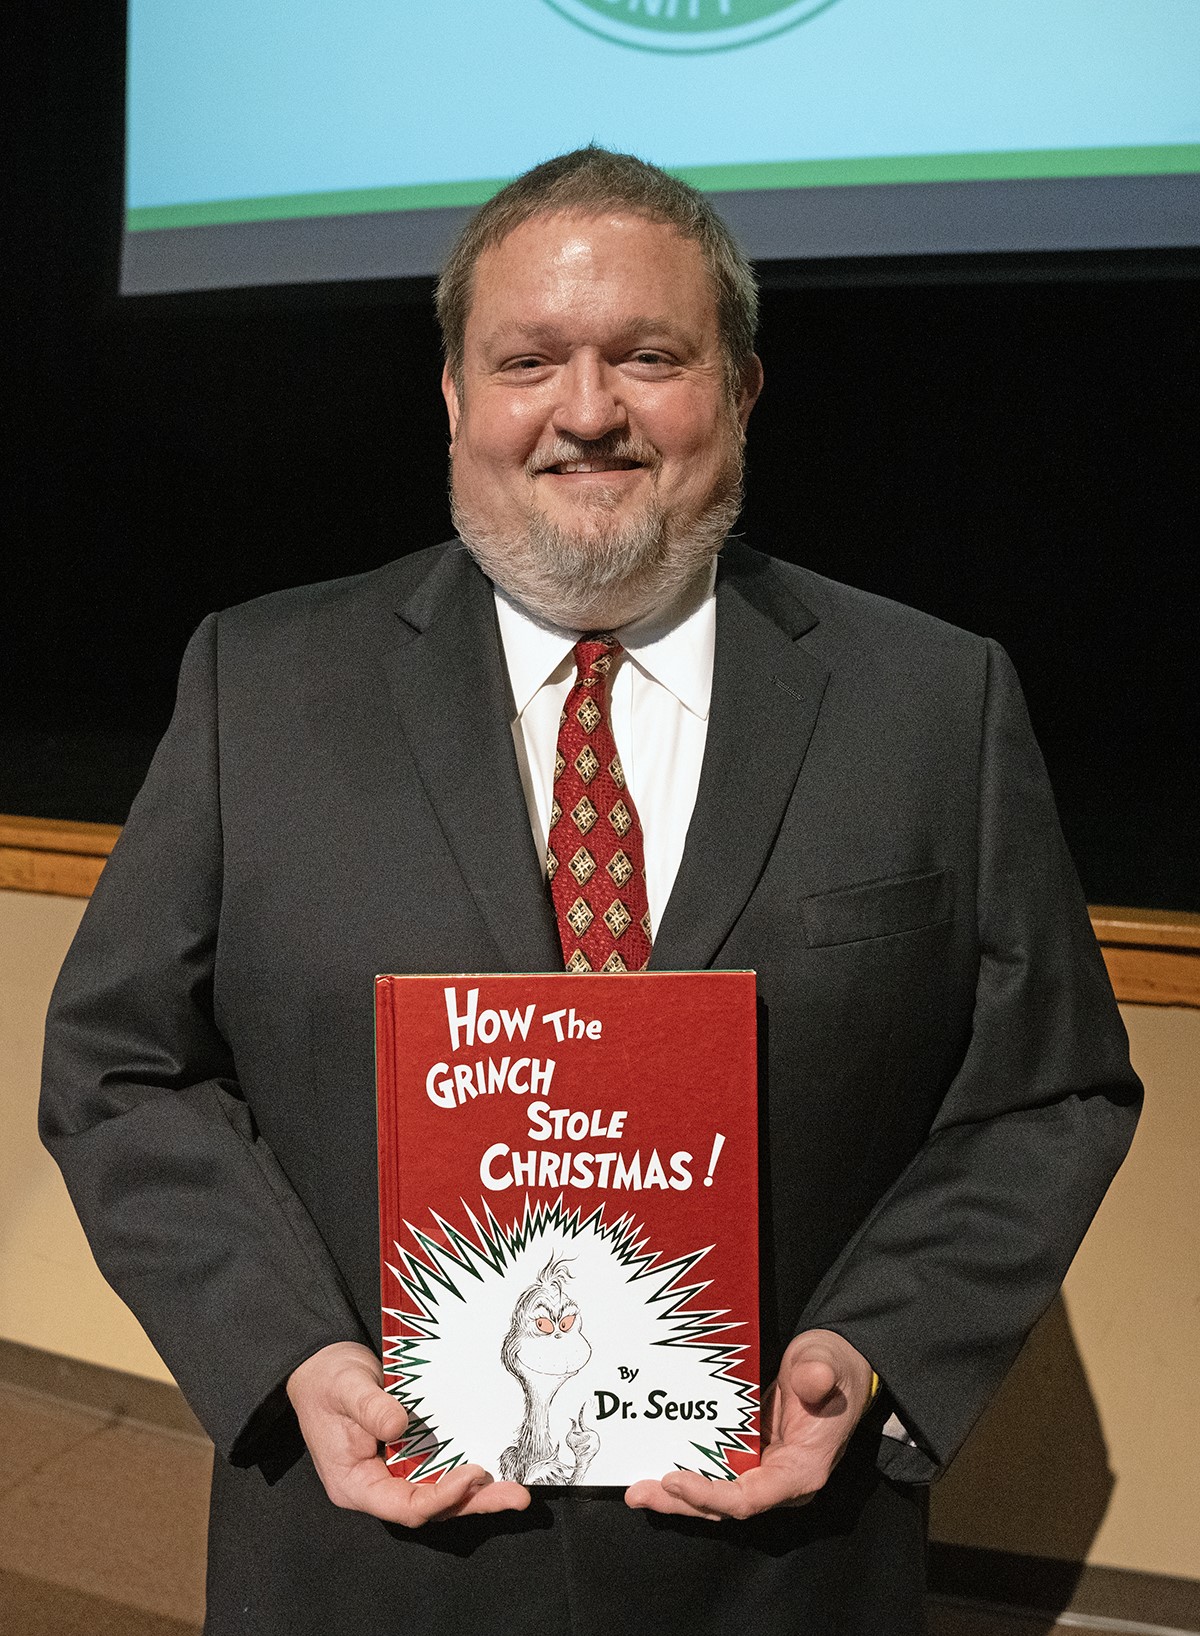 Jade Parkes with his favorite Dr. Seuss book, How the Grinch Stole Christmas! Parkes' Humanities Instructor of the Year lecture at Meridian Community College delved into Dr. Seuss's political cartoons before the artist became known for his children's books.